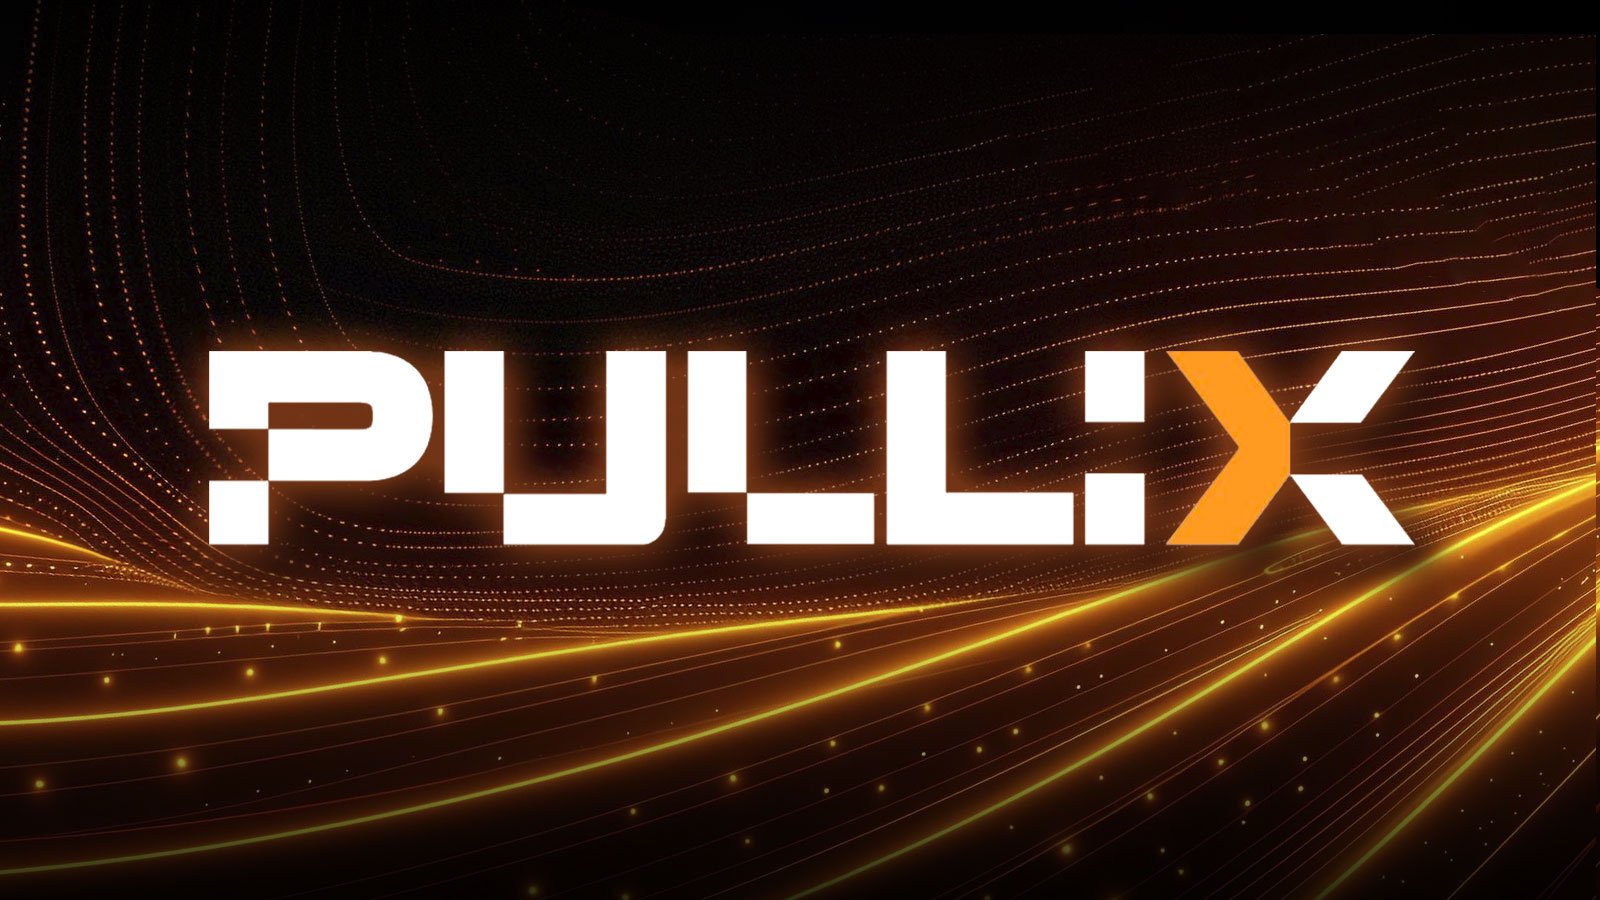 Pullix (PLX) Token Sale Gaining Attention in February when Polygon (MATIC) and Polkadot (DOT) Introduce Tech Novelties